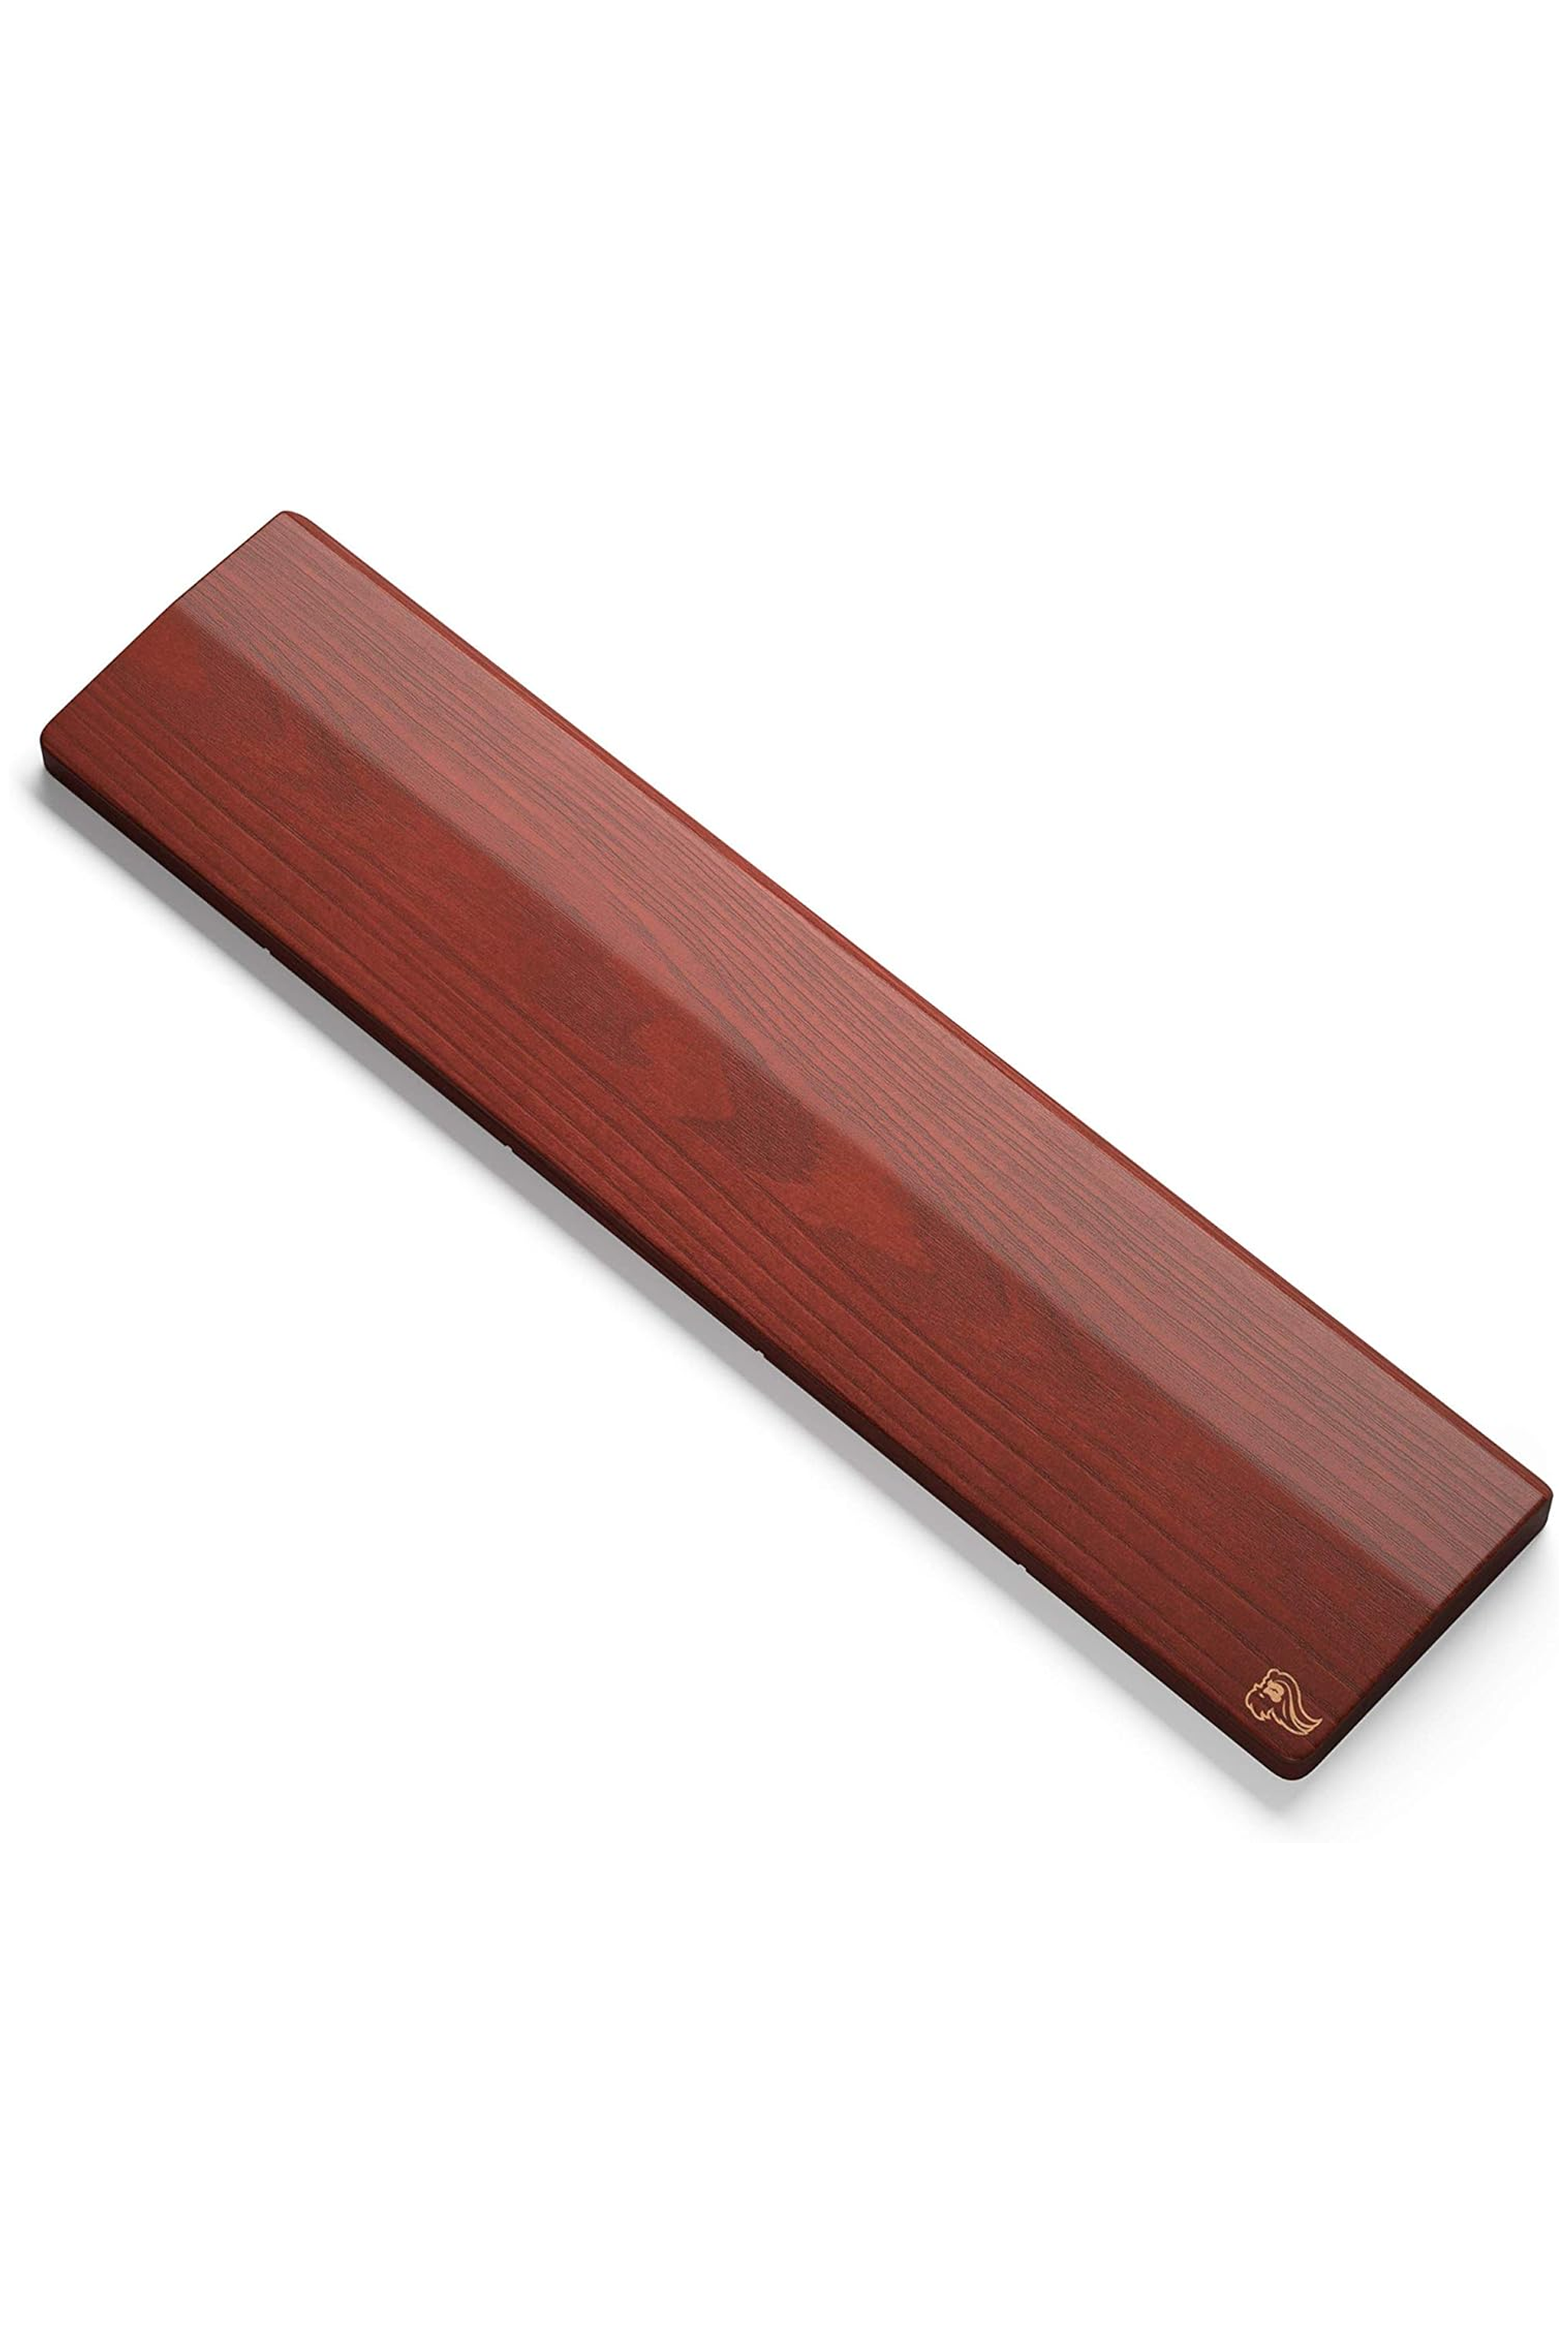 Glorious Gaming Wooden Wrist Rest